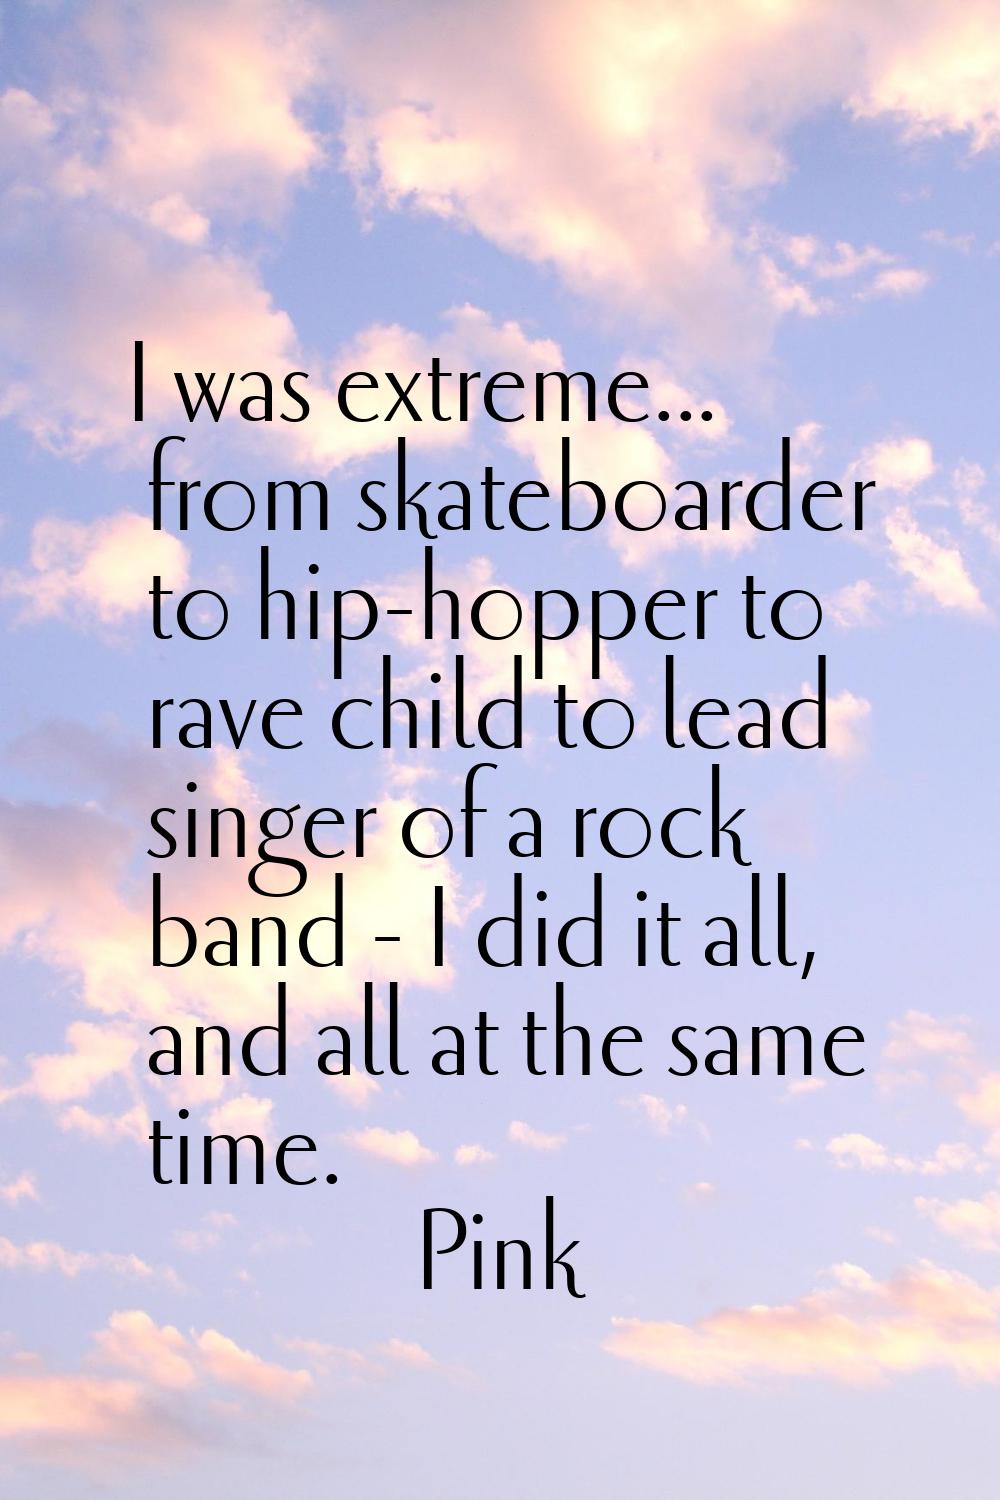 I was extreme... from skateboarder to hip-hopper to rave child to lead singer of a rock band - I di